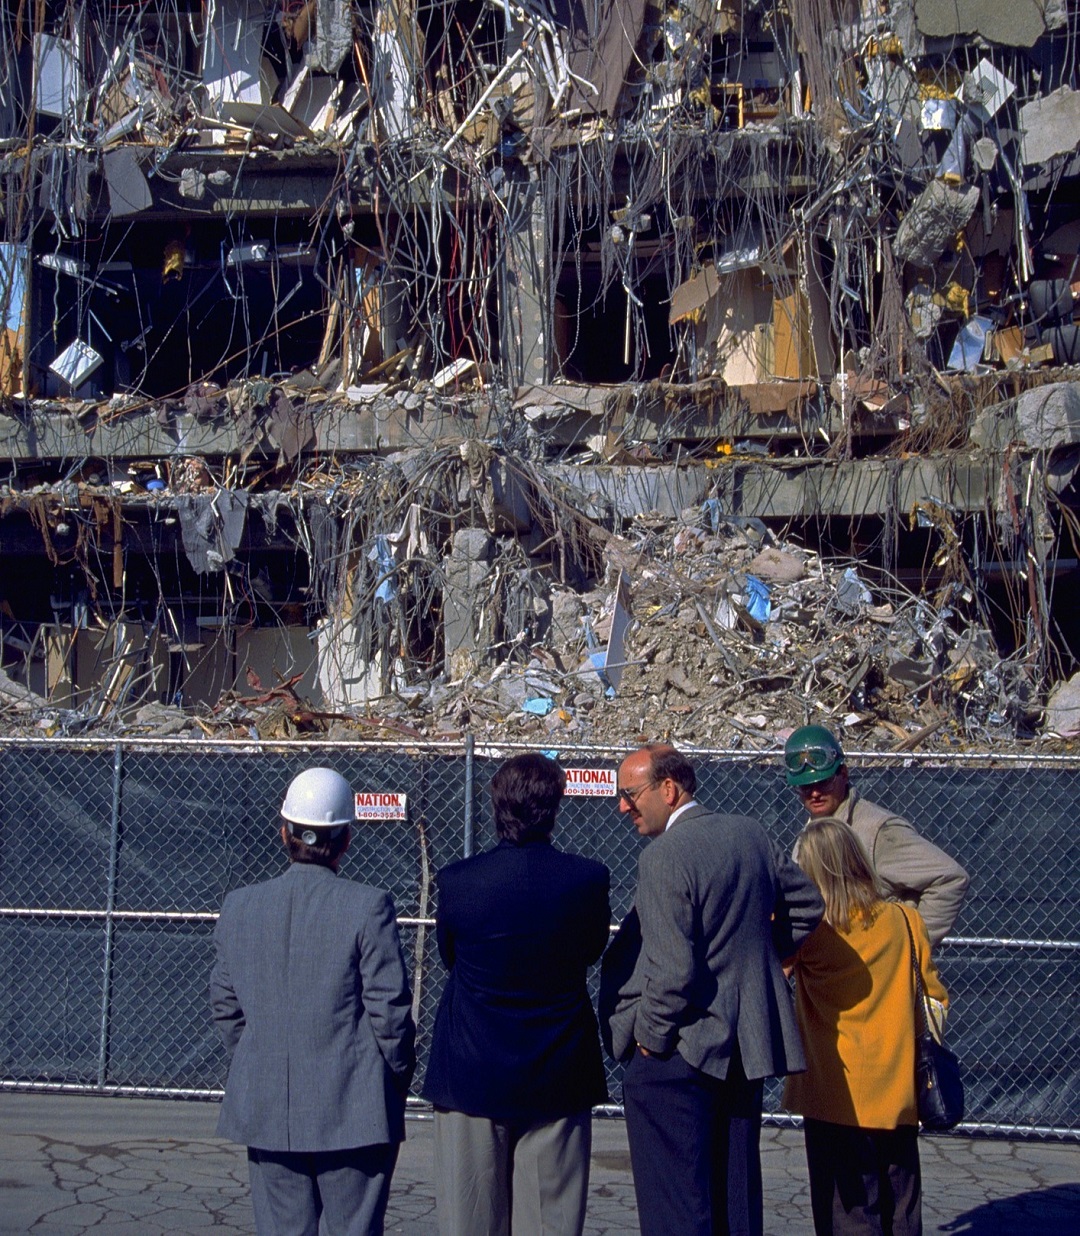 Northridge, California - January 19, 1994: Experts survey office building with one side entirely collapsed from the Martin Luther King Day earthquake.